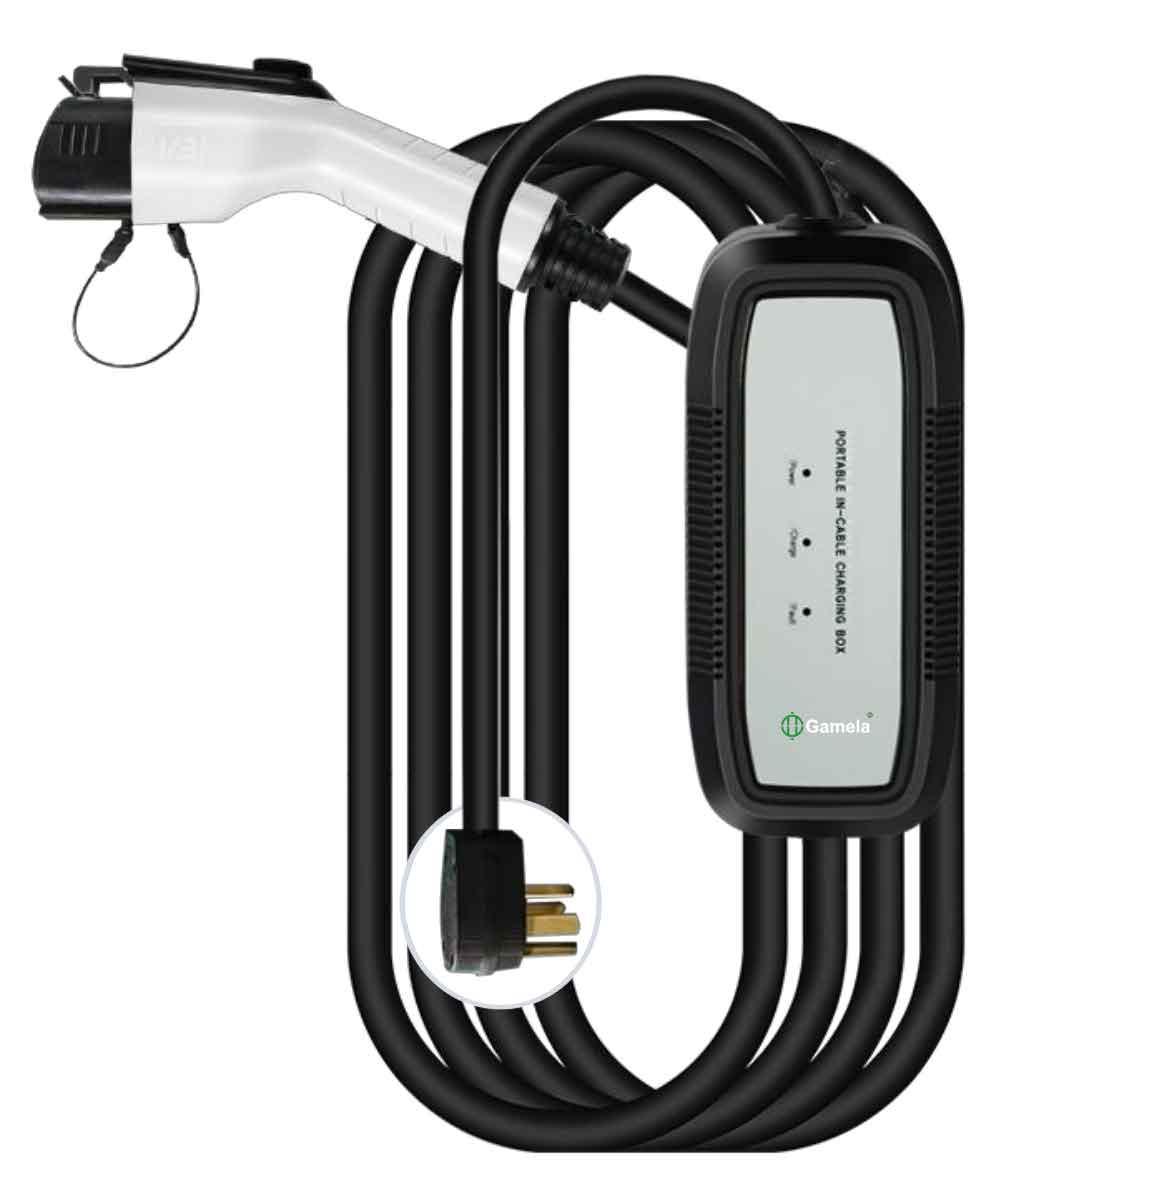 1441EAMG - Type1-J1772-40A-AC-Indicator-Light-Portable-Ev-Charger-with-power-plug-14-50P-output-current-40A